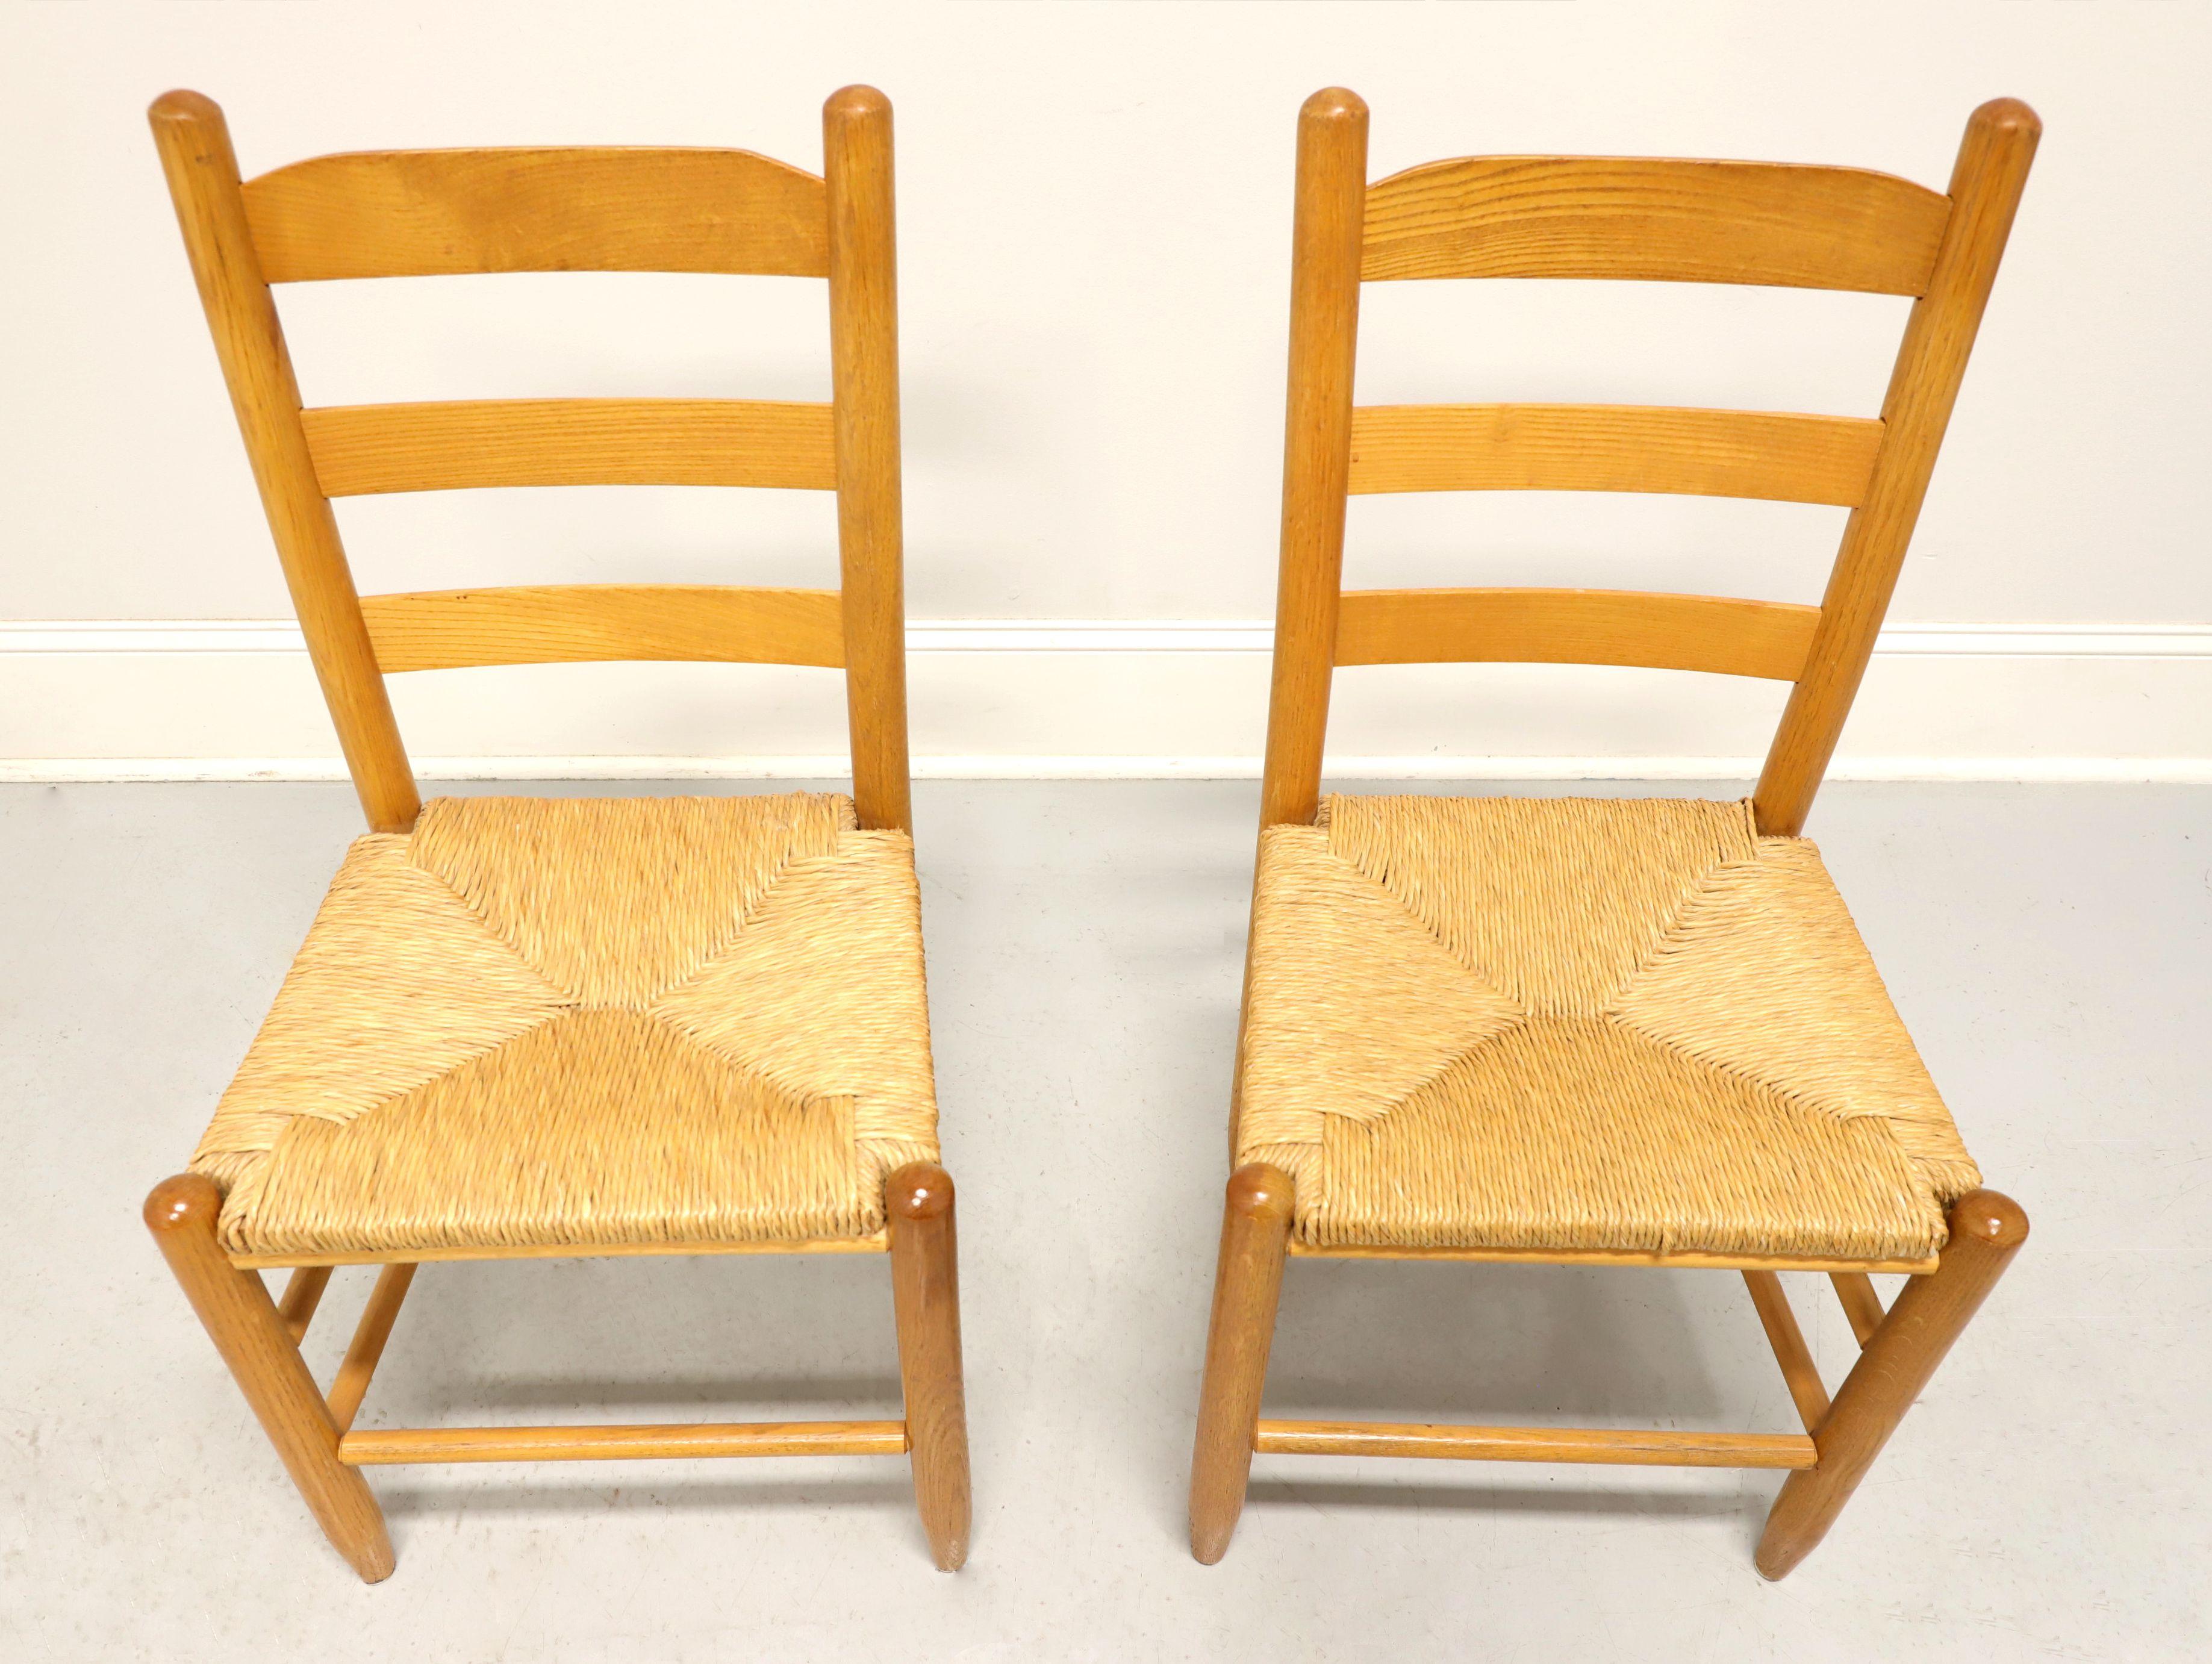 A pair of cottage style dining side chairs, unbranded. Solid oak with ladder back design, rush seats, tapered round legs and stretchers. Made in the USA, in the mid 20th century.

Measures: Overall: 17.5 W 17 D 35.5 H, Seat: 16.75 W 14 D 18